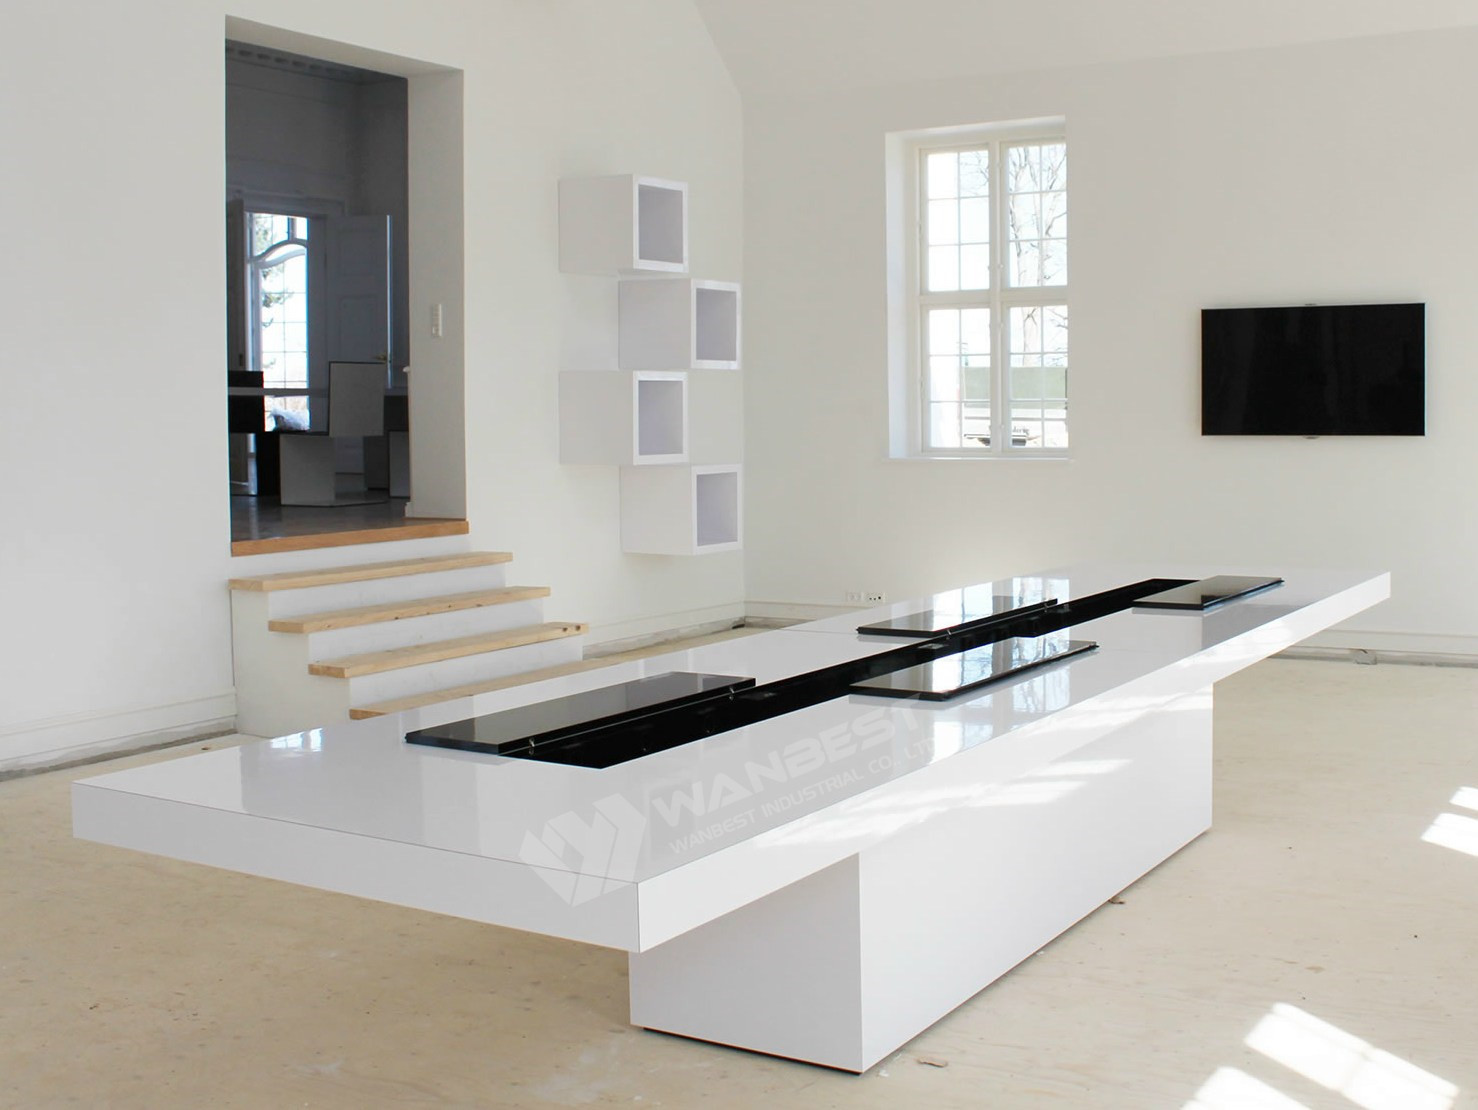 Artificial stone conference table